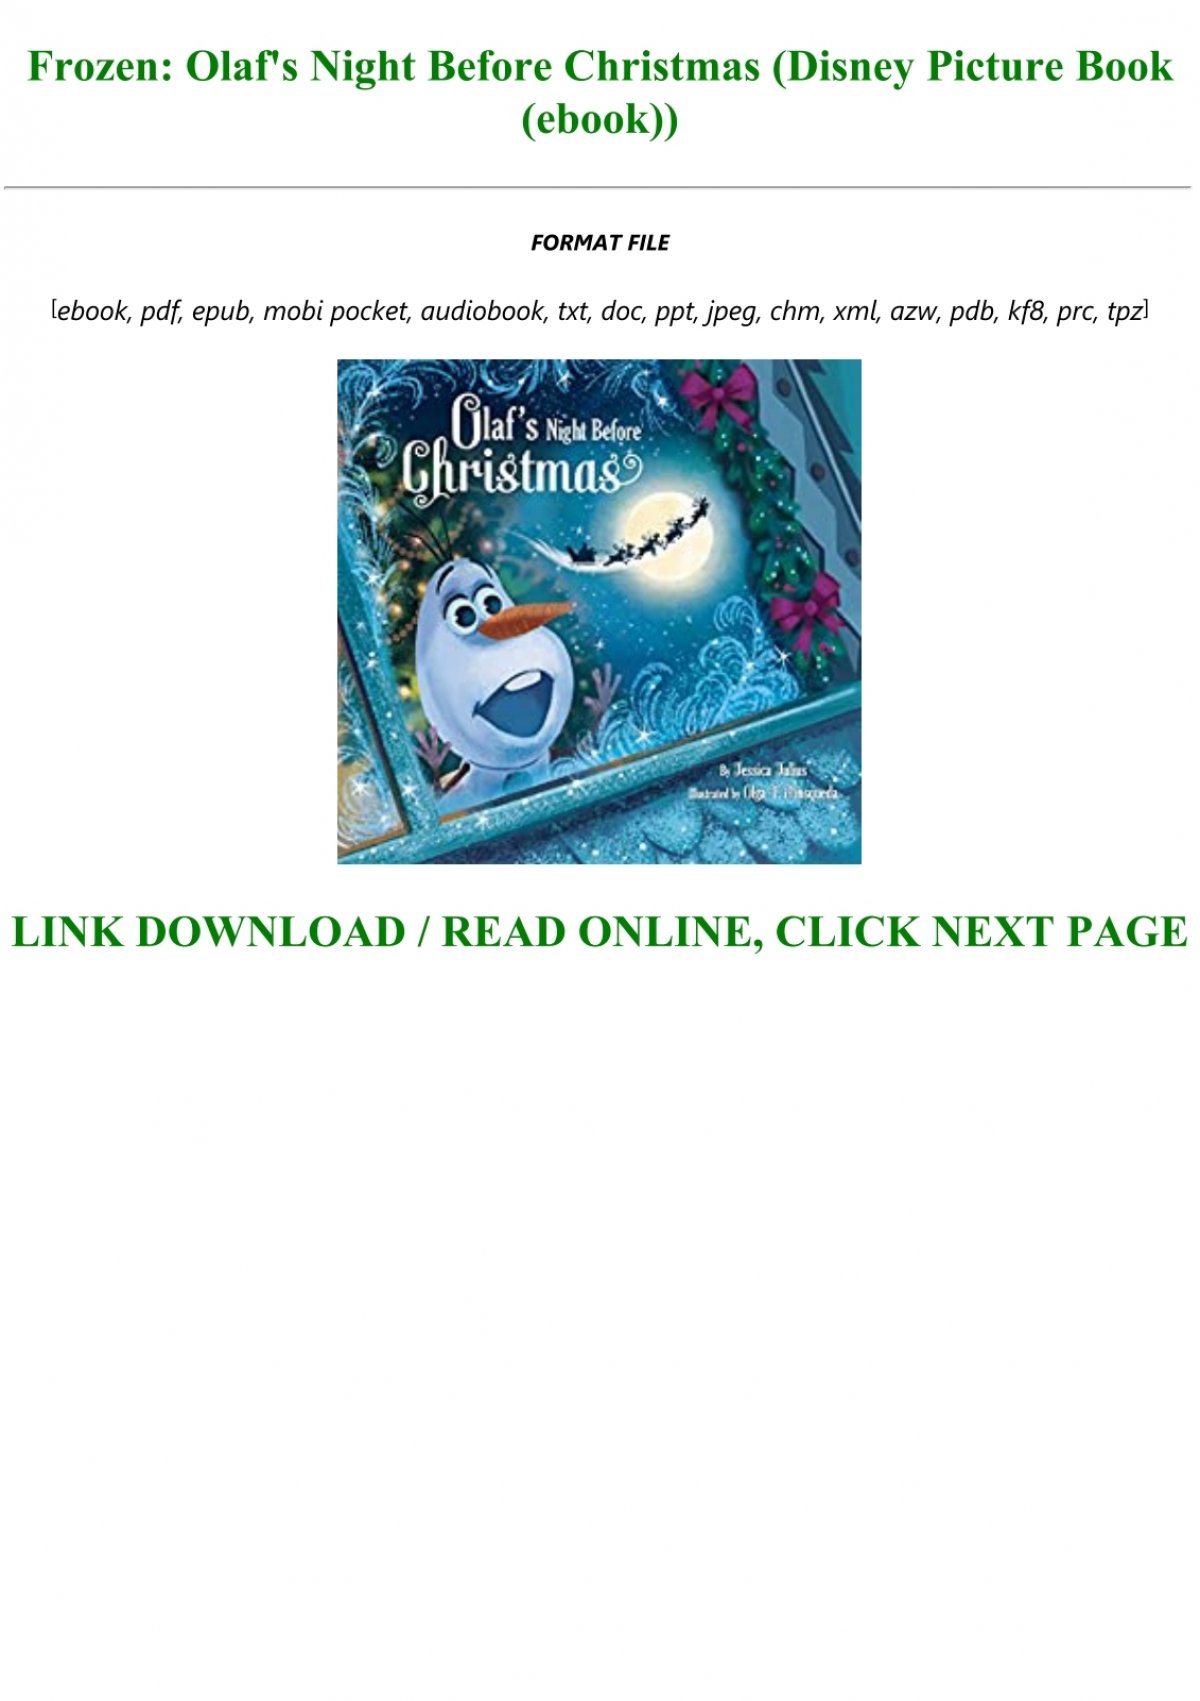 Frozen Olafs Night Before Christmas Disney Picture Book Ebook Download Free Ebook